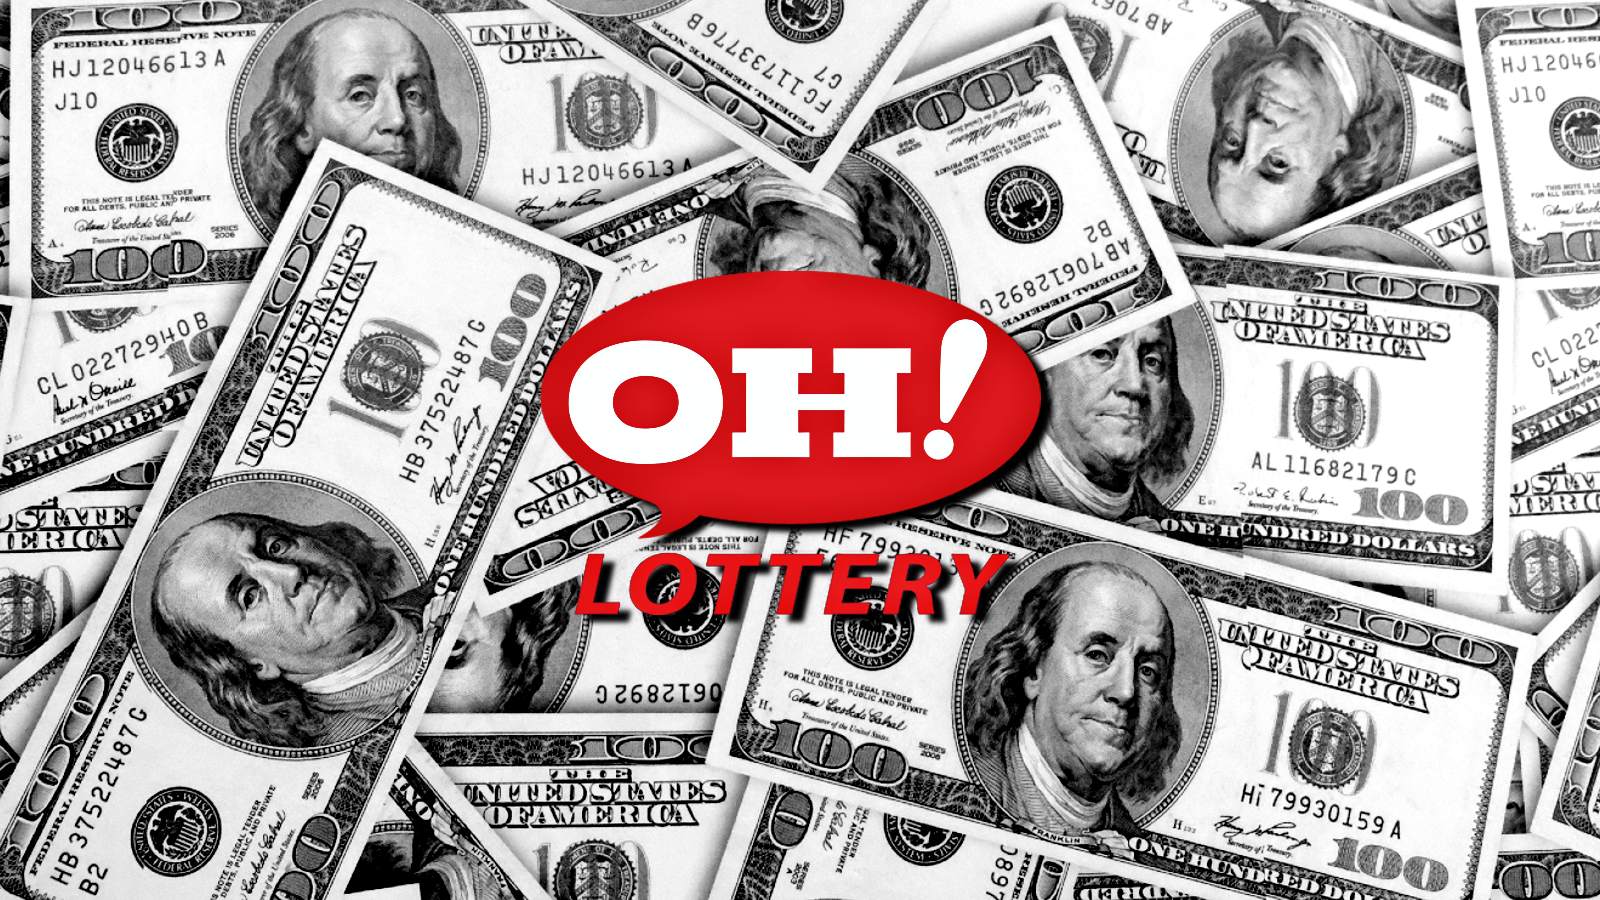 Ohio Lottery hit by cyberattack claimed by DragonForce ransomware